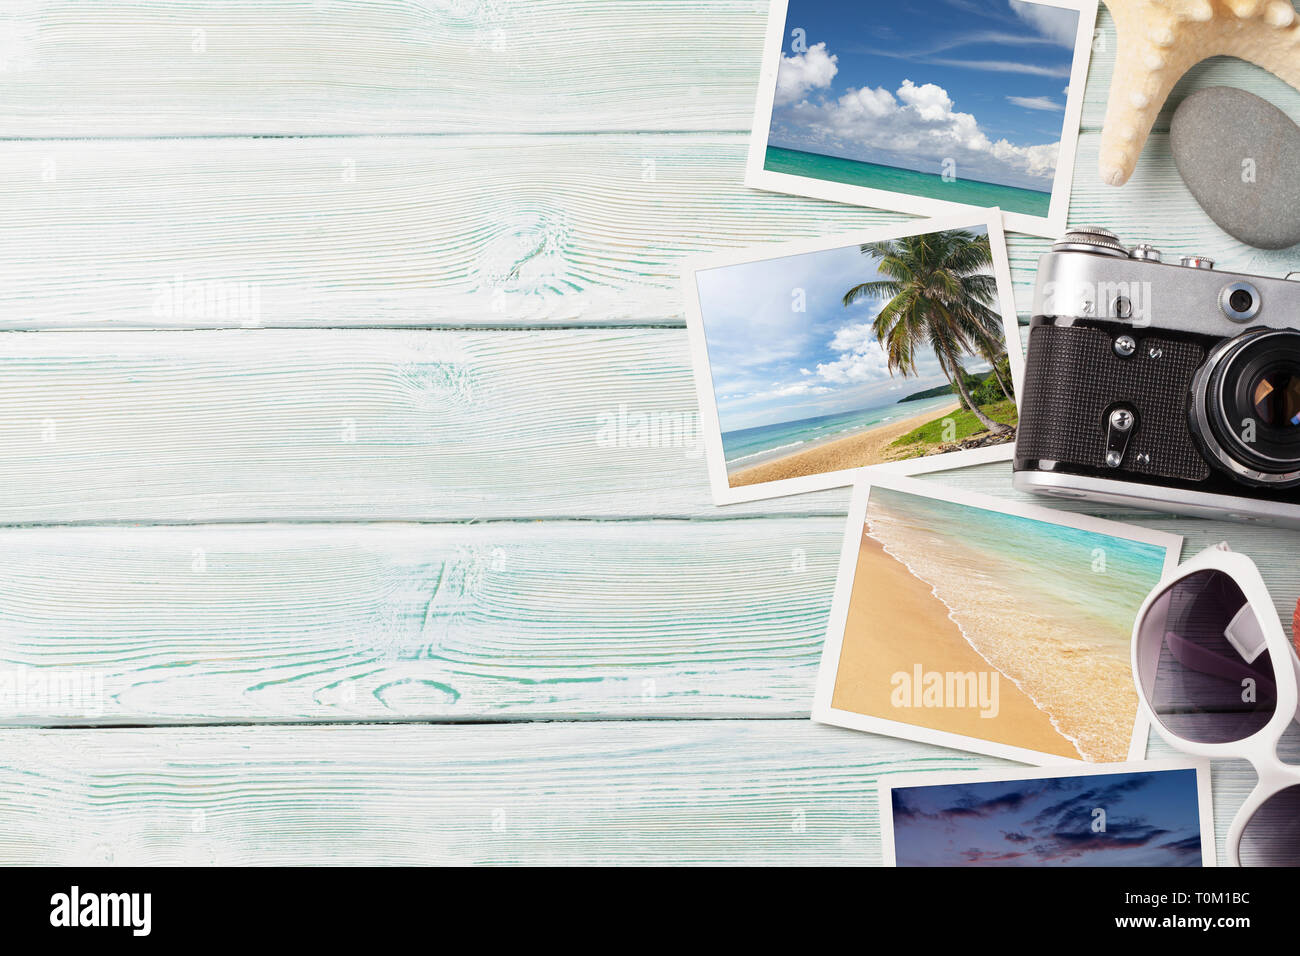 Travel vacation background concept with sunglasses, camera and weekend photos on wooden backdrop. Top view with copy space. Flat lay. All photos taken Stock Photo